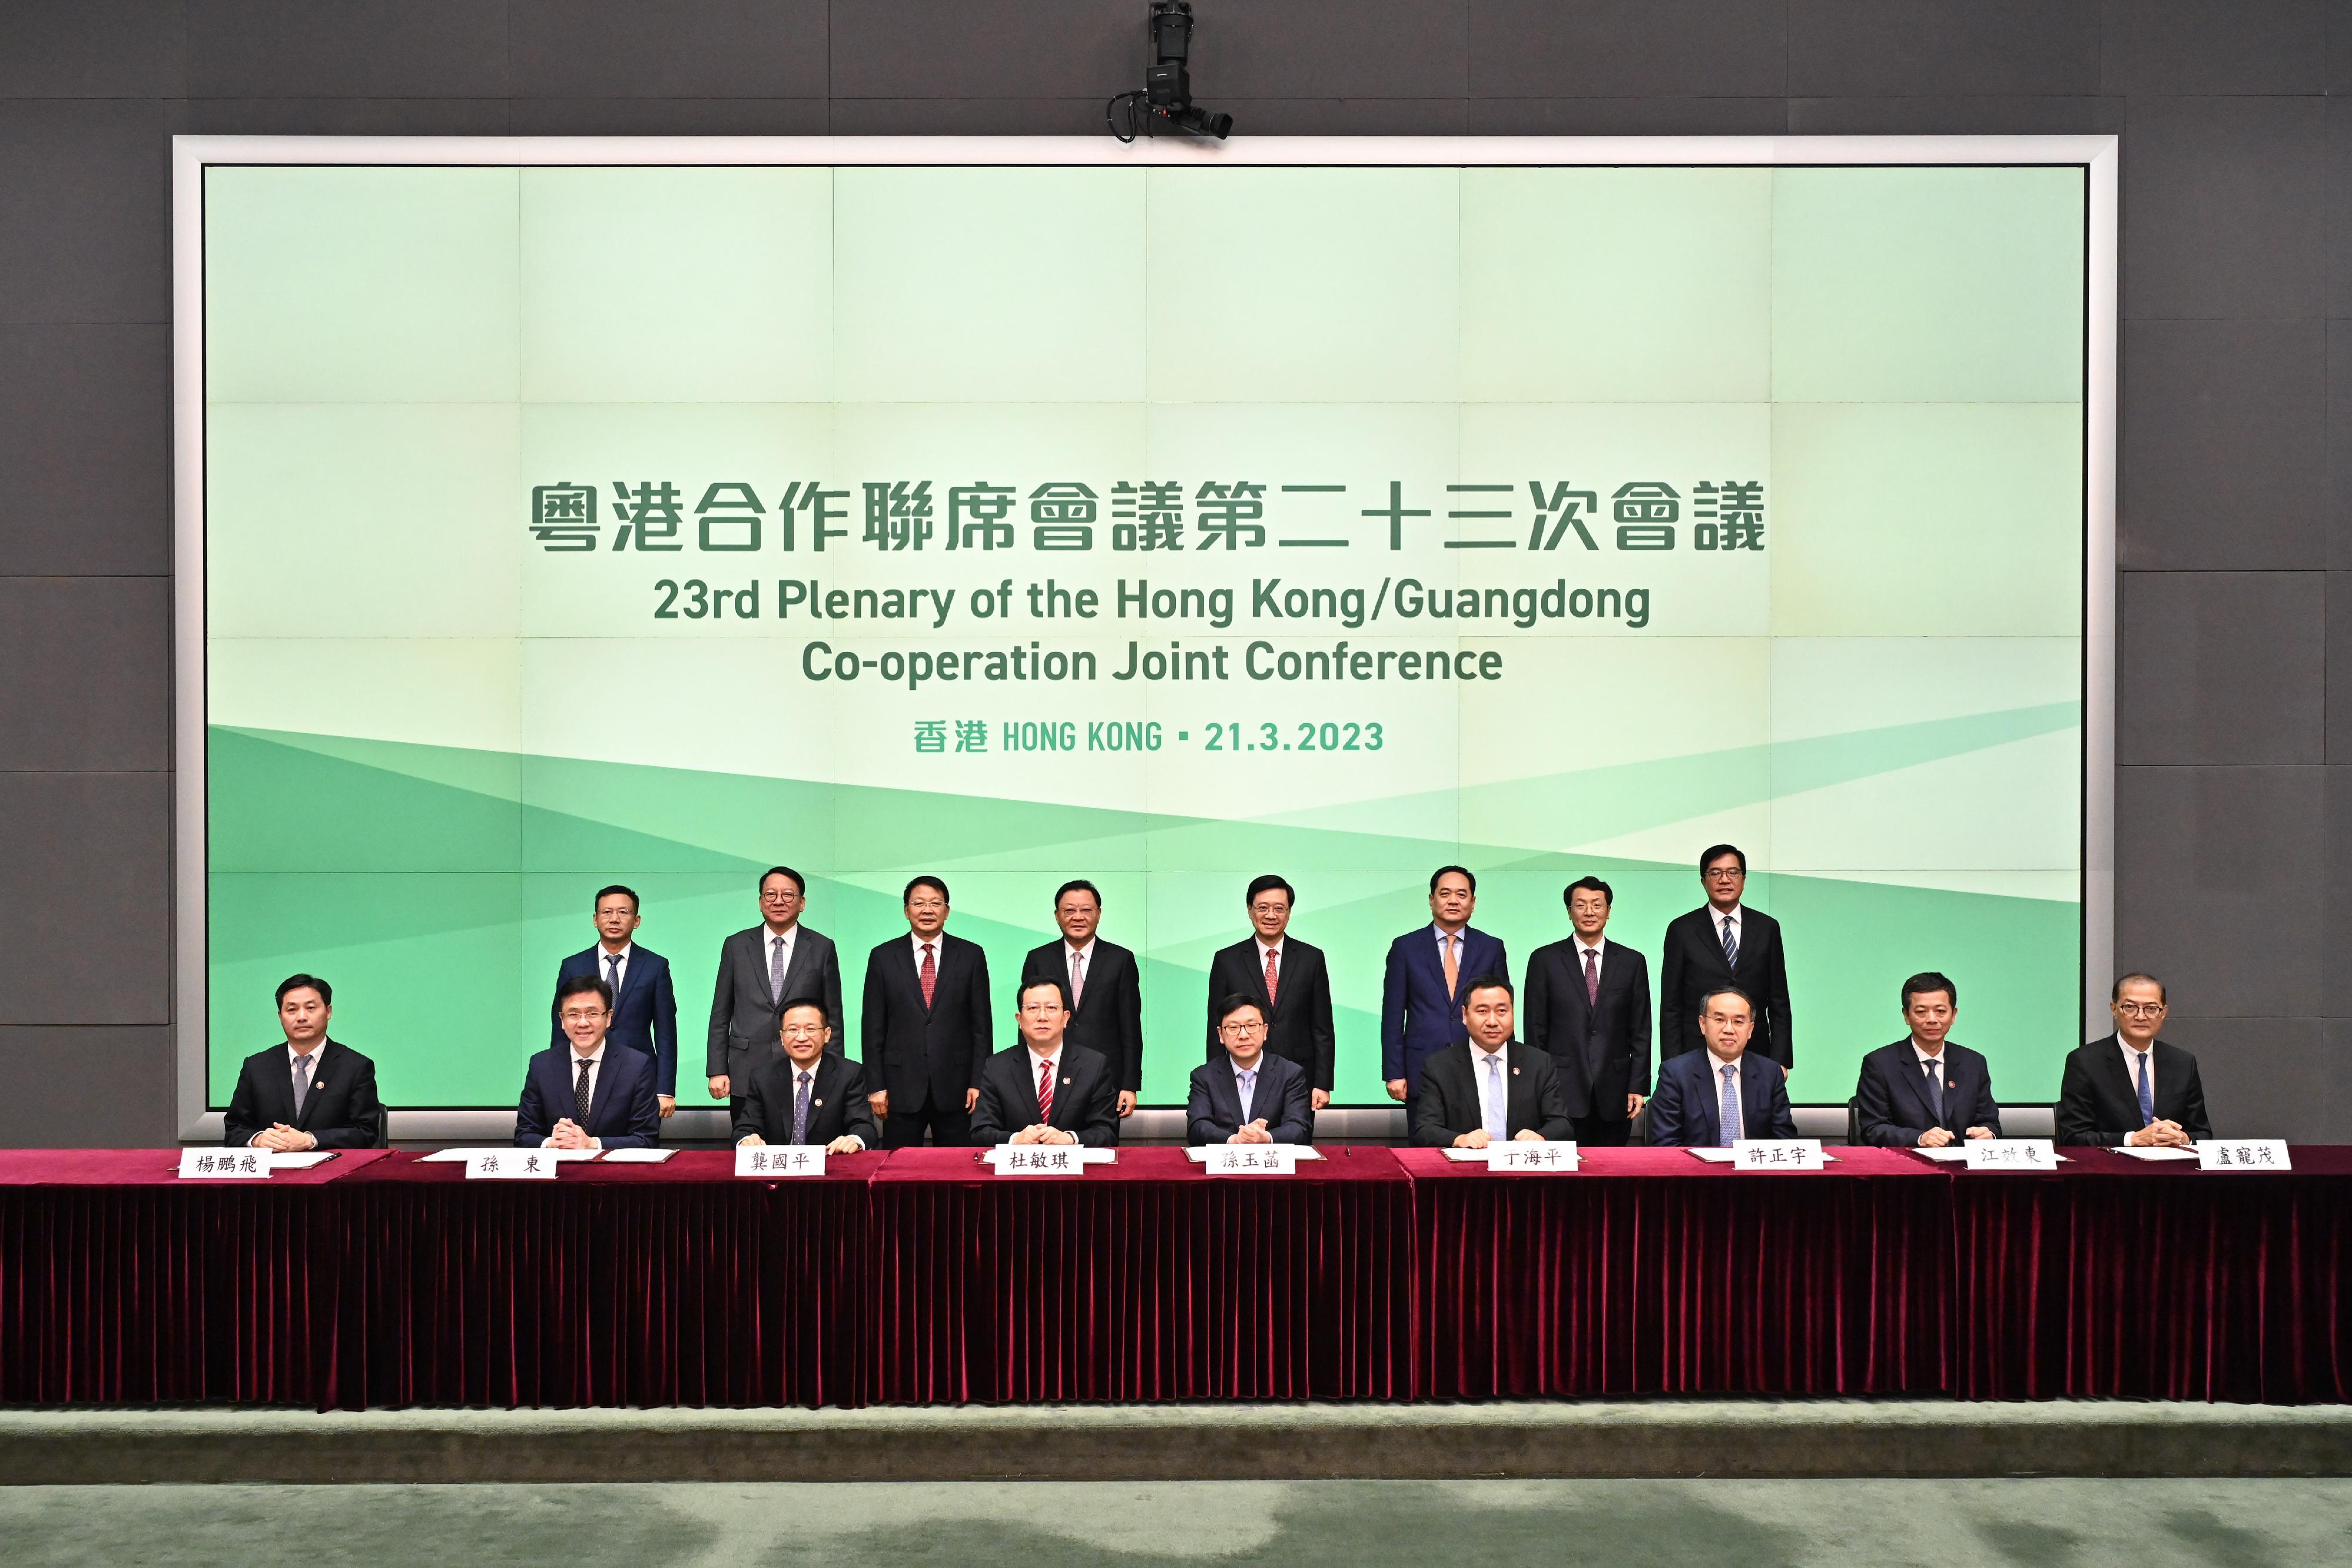 The Chief Executive, Mr John Lee, led the Hong Kong Special Administrative Region (HKSAR) Government delegation to attend the 23rd Plenary of the Hong Kong/Guangdong Co-operation Joint Conference in the Central Government Offices today (March 21). Photo shows (back row, from second left) the Chief Secretary for Administration, Mr Chan Kwok-ki; Deputy Director of the Liaison Office of the Central People's Government in the HKSAR Mr Yin Zonghua; the Governor of Guangdong Province, Mr Wang Weizhong; Mr Lee; Deputy Director of the Hong Kong and Macao Affairs Office of the State Council Mr Yang Wanming; and other officials from both sides witnessing the signing of agreements on co-operation between Hong Kong and Guangdong. The agreements signed include the Co-operation Agreement on Technology and Innovation Exchange between Guangdong and Hong Kong; the Agreement on Enhancing Hong Kong-Guangdong Financial Co-operation; the Guangdong/Hong Kong Exchange and Training Cooperation Agreement on Labour Inspection and Law Enforcement; the Co-operation Agreement between Guangdong and the HKSAR on Co-developing a Smart City Cluster; and the Memorandum of understanding on drugs and medical devices monitoring and cooperation in the Guangdong-Hong Kong-Macao Greater Bay Area.